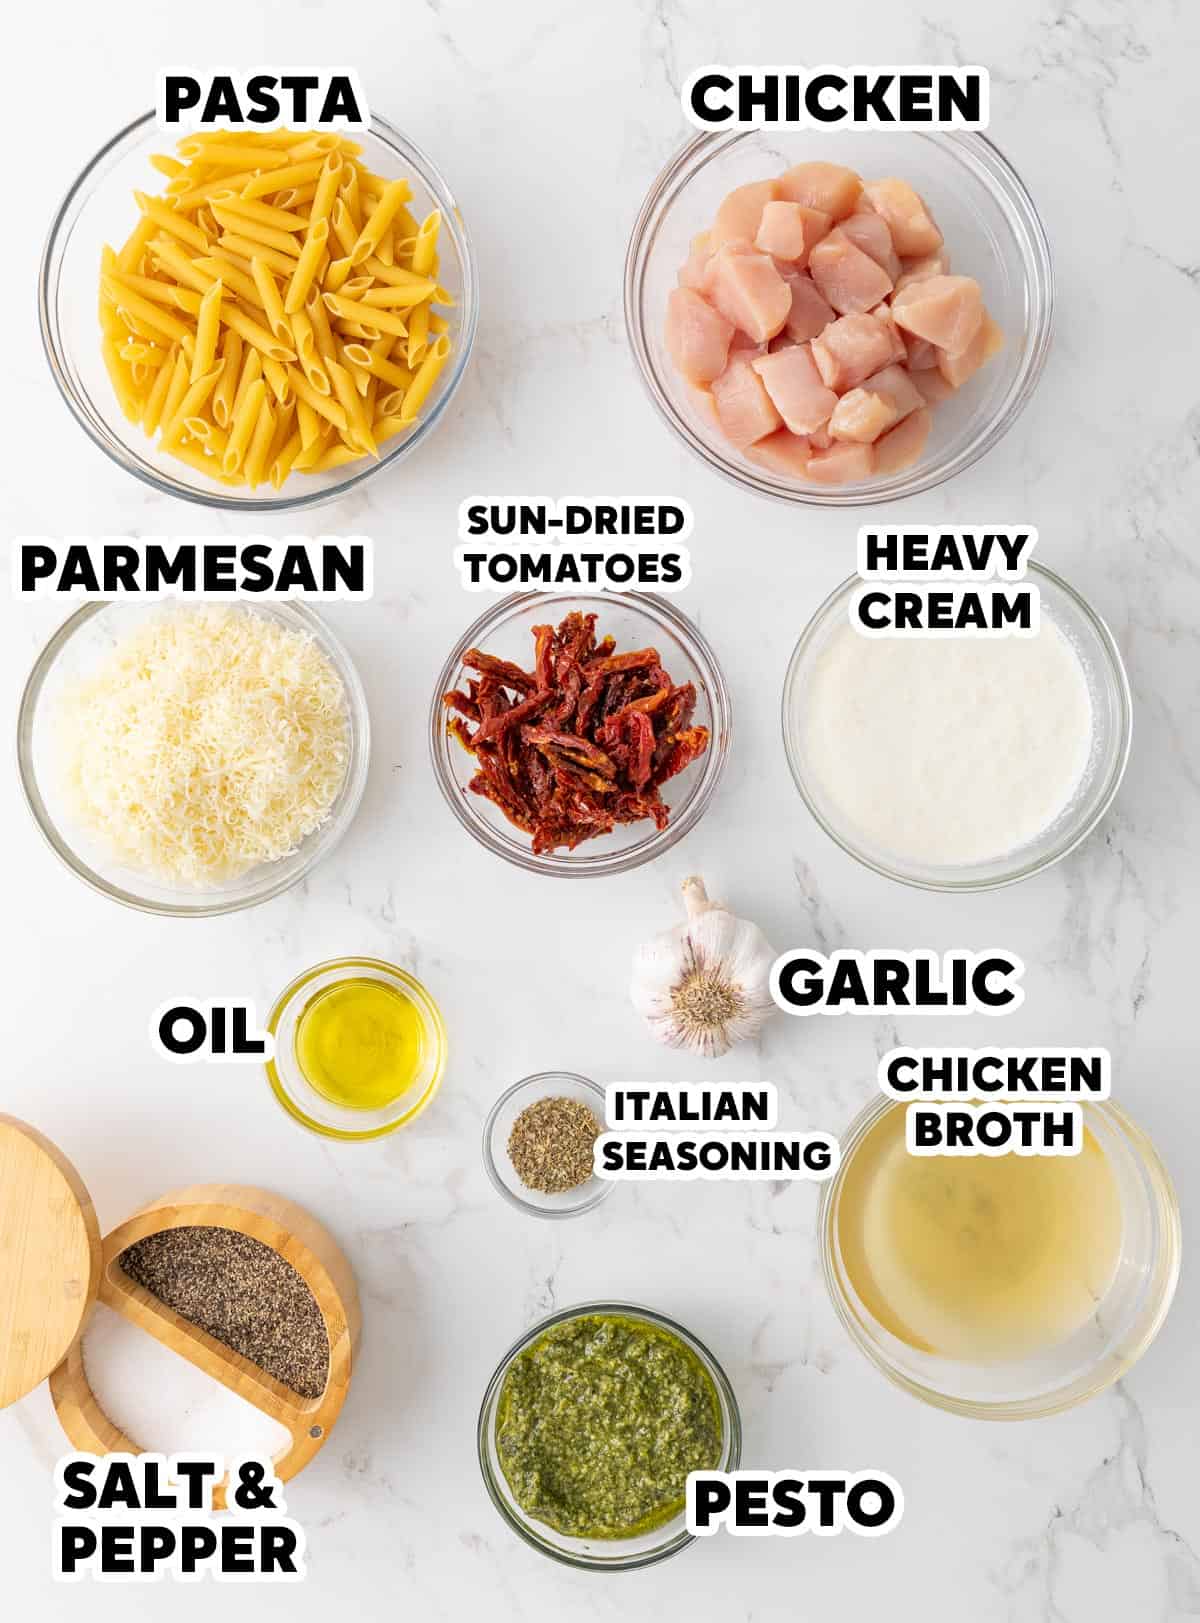 Overhead view of ingredients for making chicken pesto pasta with overlay text.